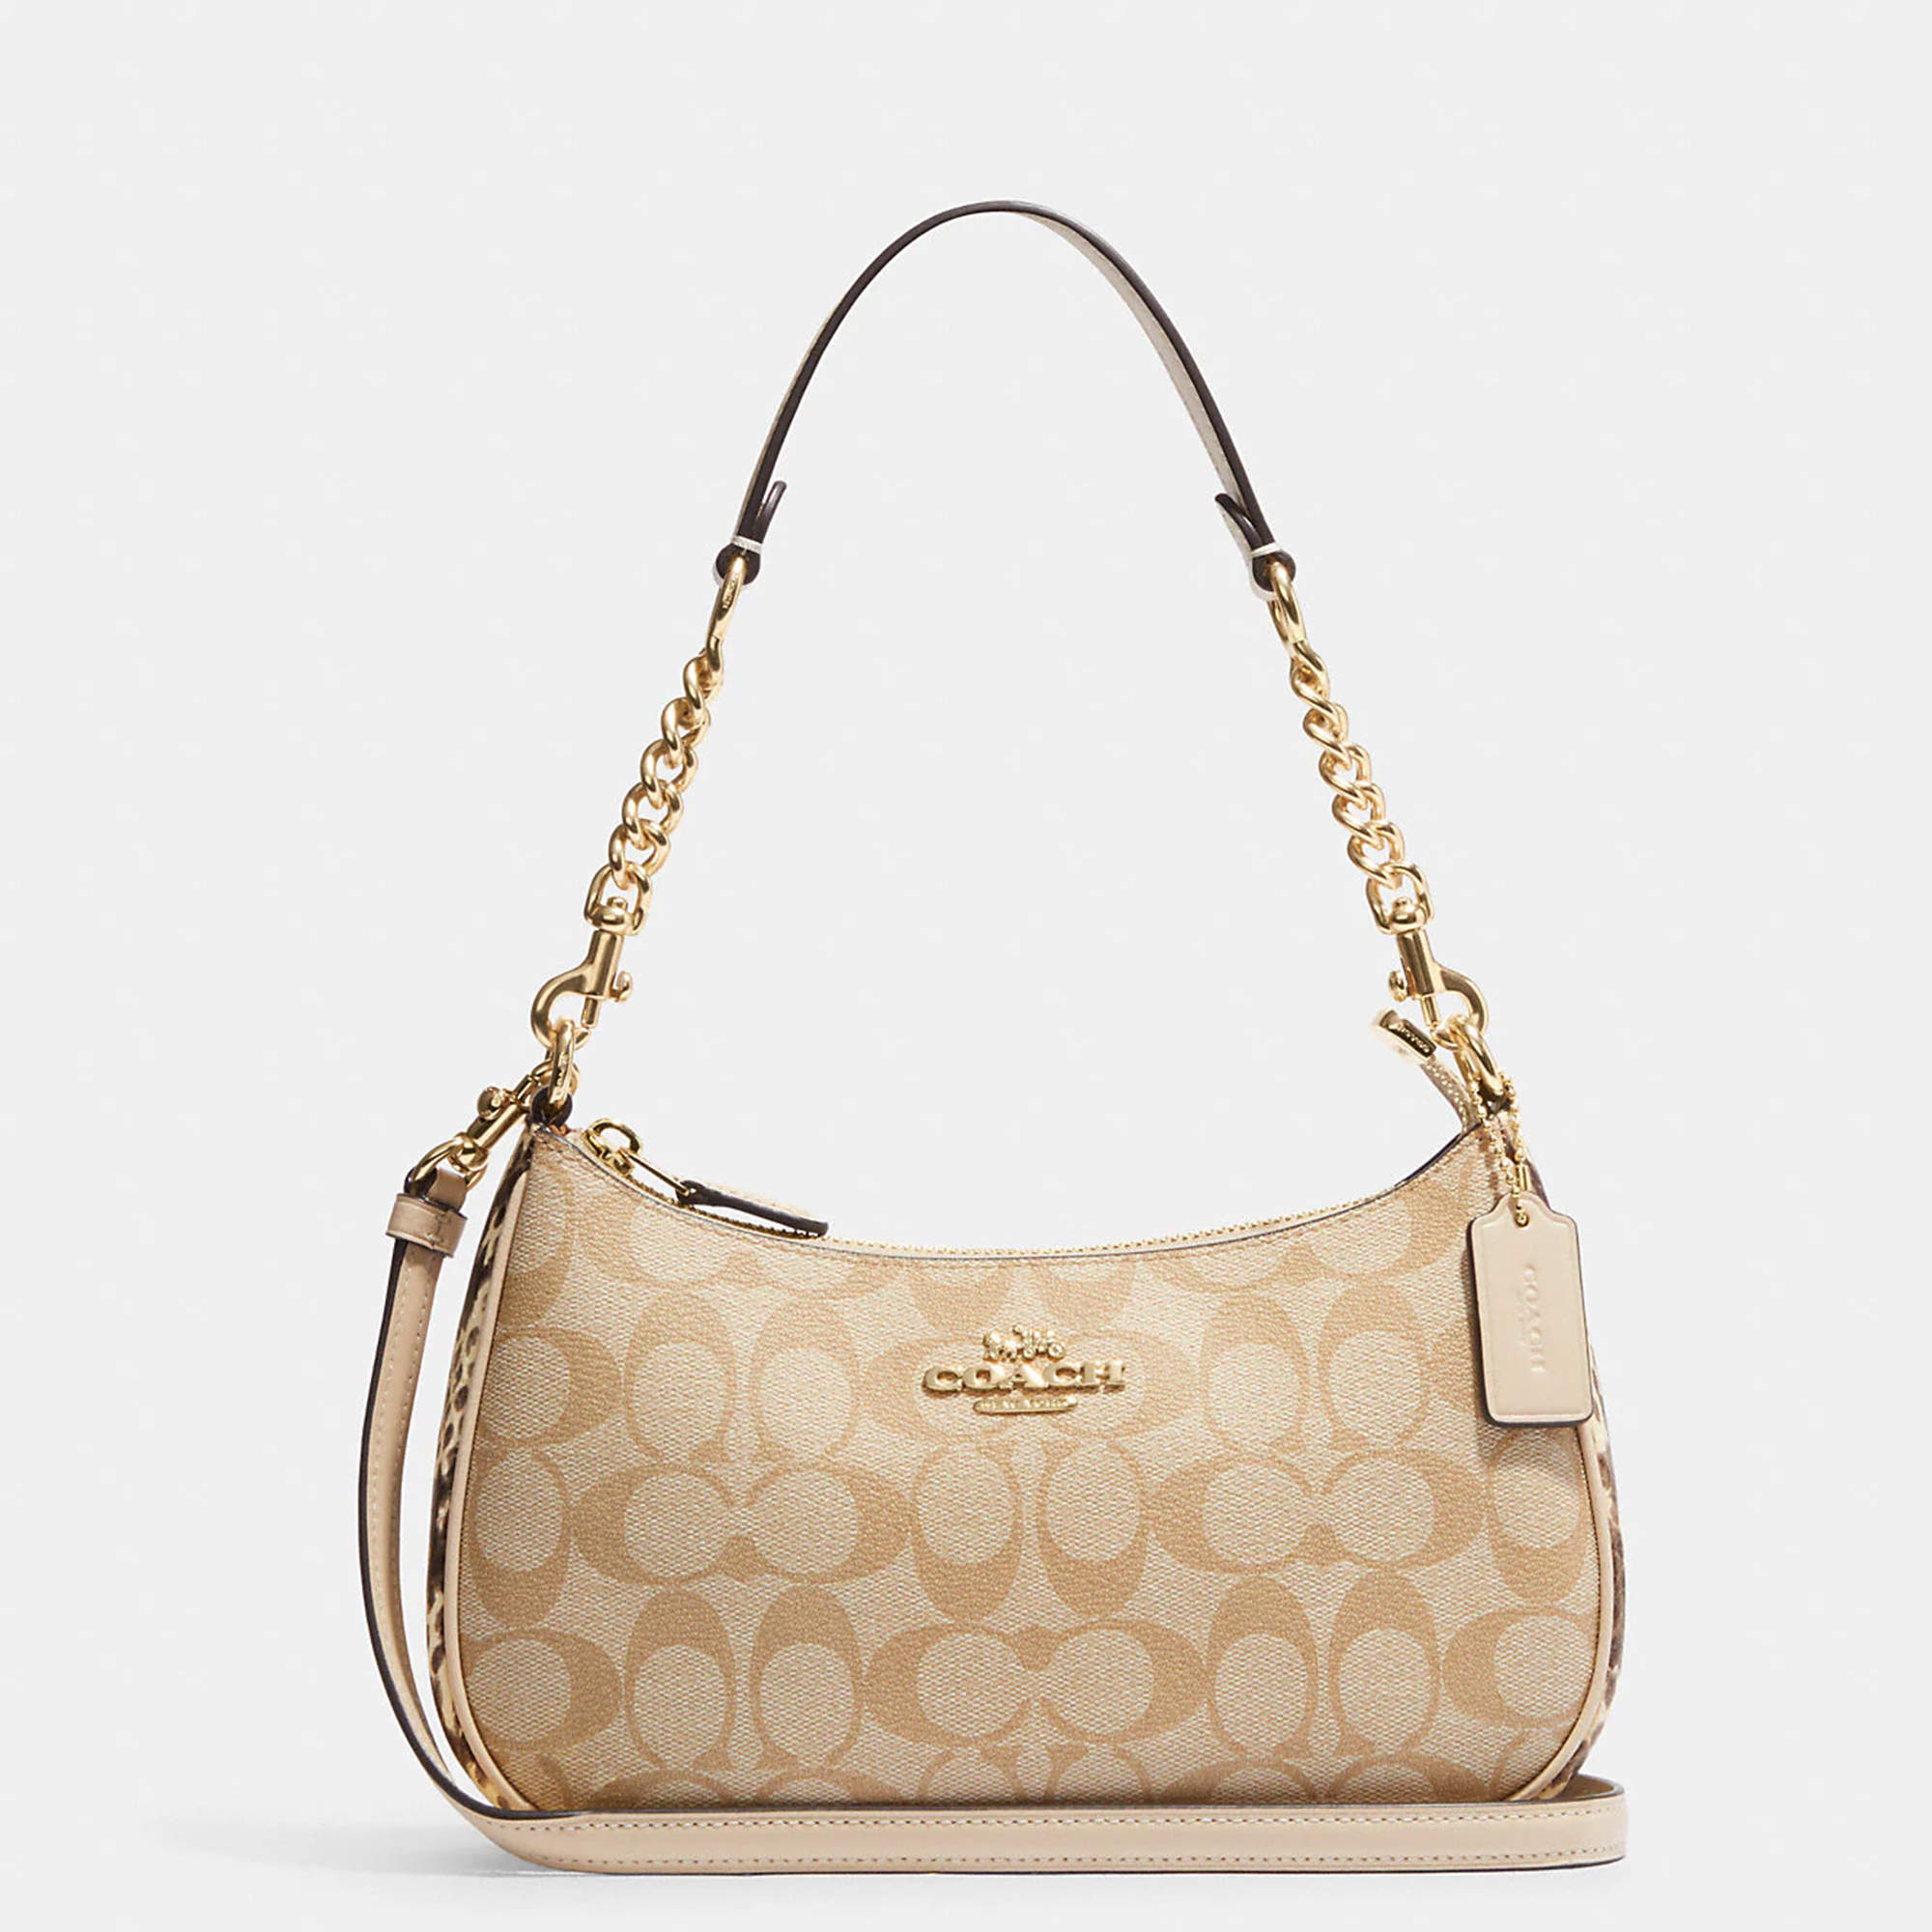 Coach White/Beige Leather and Canvas and Snake Embossed Shoulder Bag